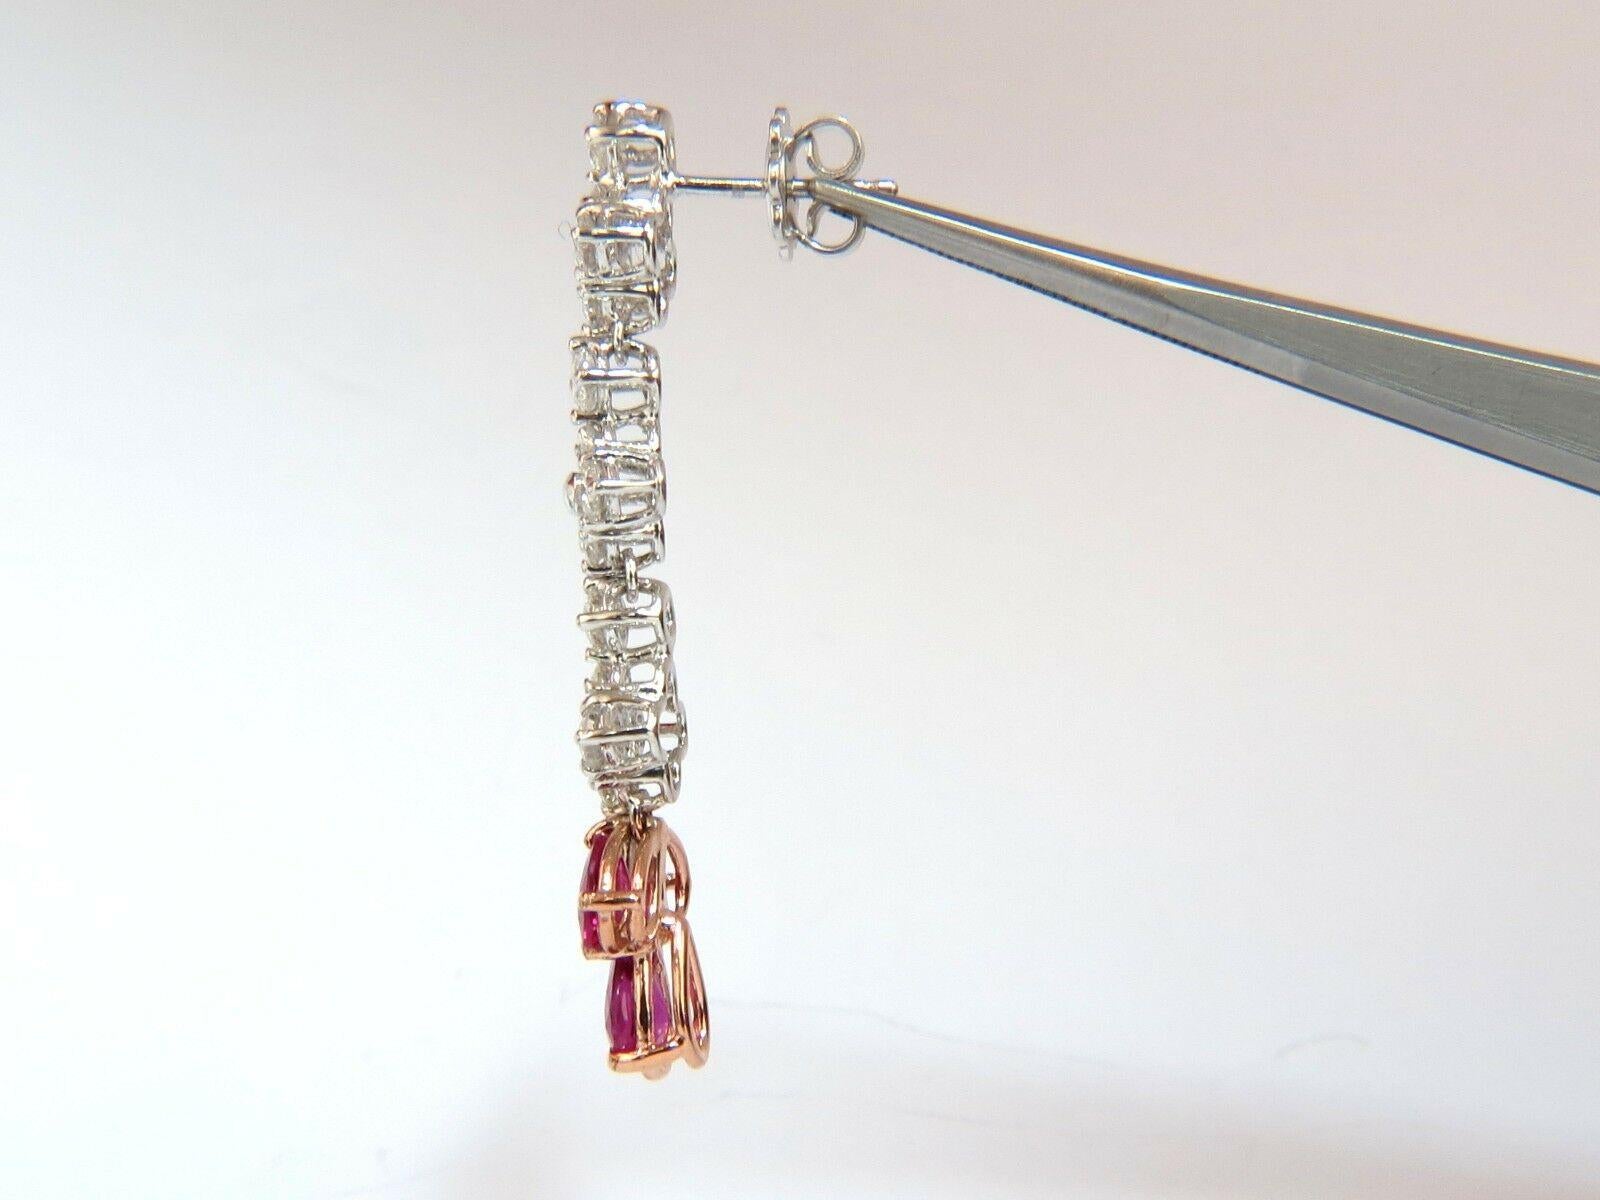 Diamond Custer Dangles & No heat Rubies (6)

3.14ct. Natural Vivid Red Rubies

6.3 X 4.5mm (average)

Full cut Pear brilliants.

Excellent, clean clarity & transparent

The Fine Pigeon Blood. 



2.80ct. round, full cut diamonds.

G-color Vs-2